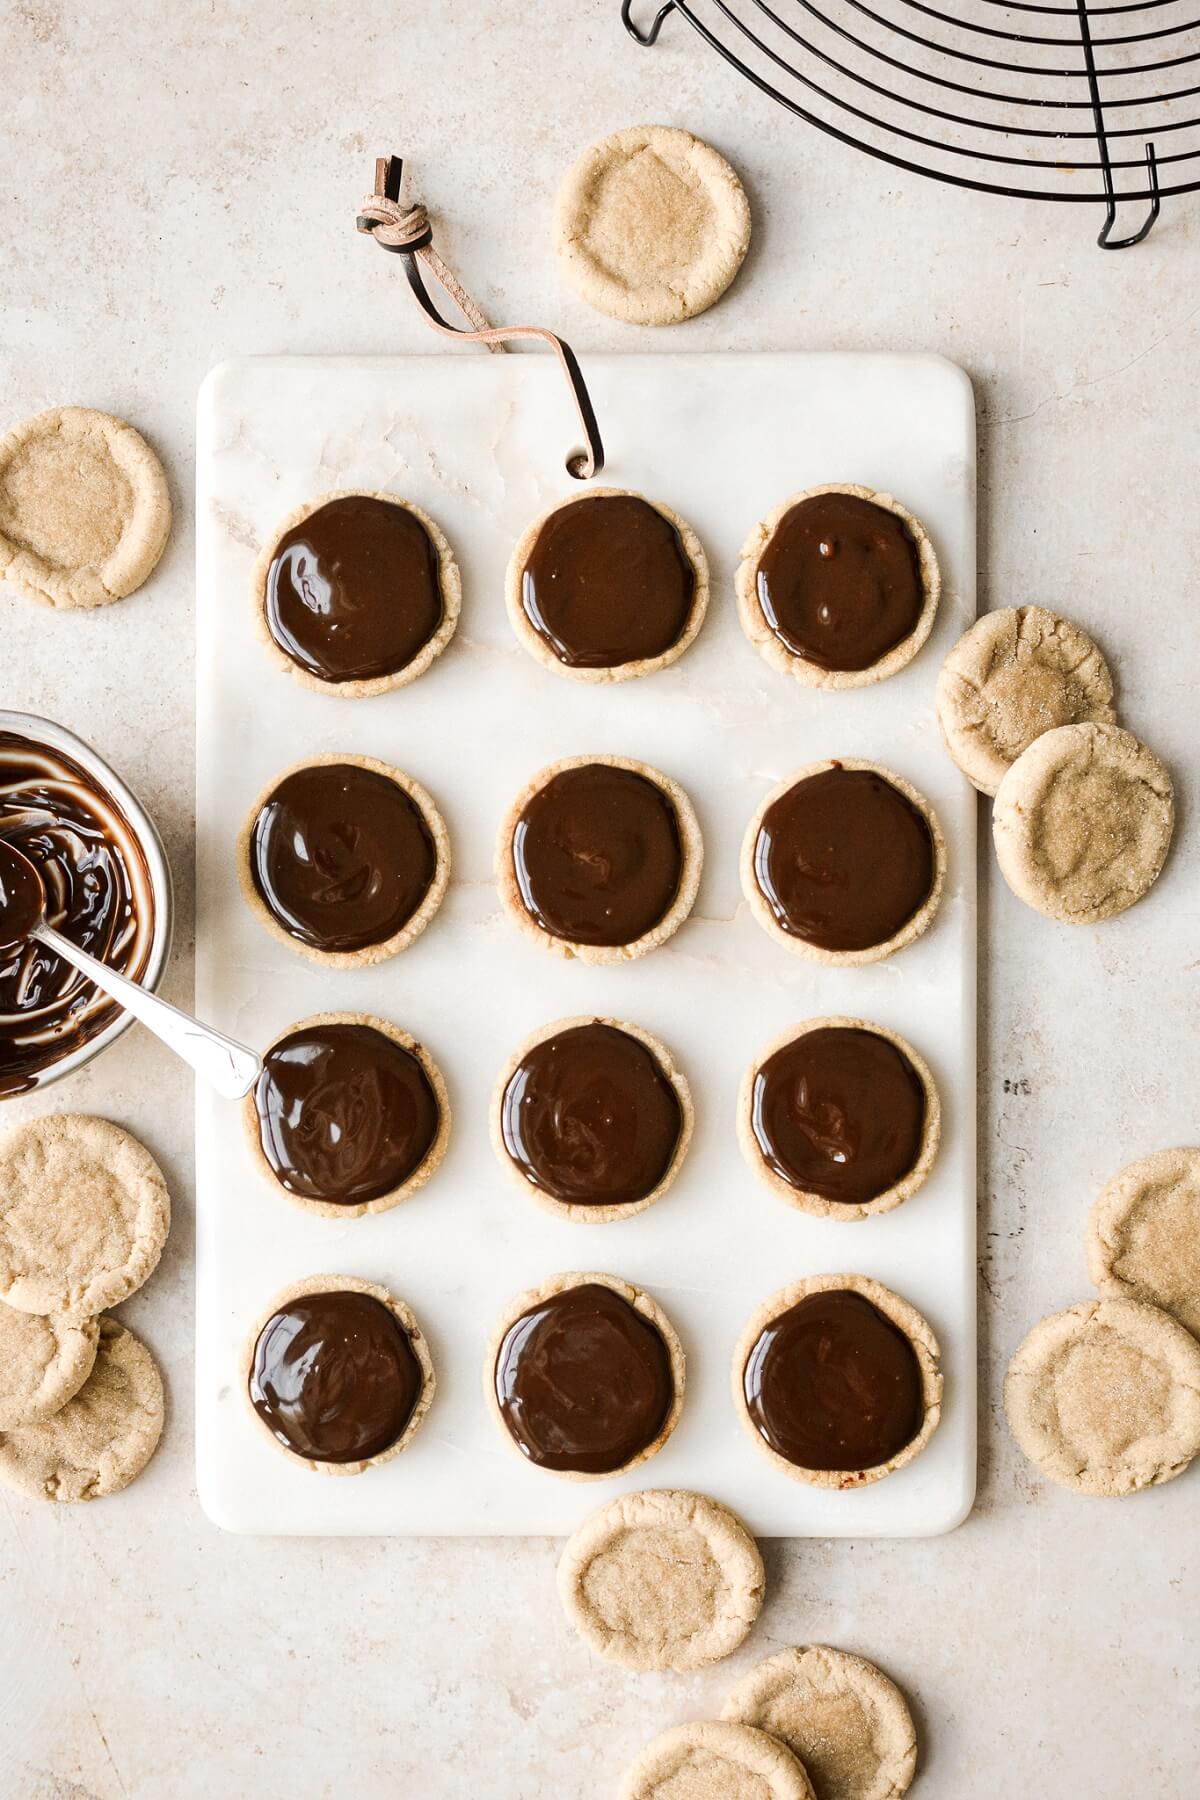 Butterscotch cookies topped with chocolate ganache.